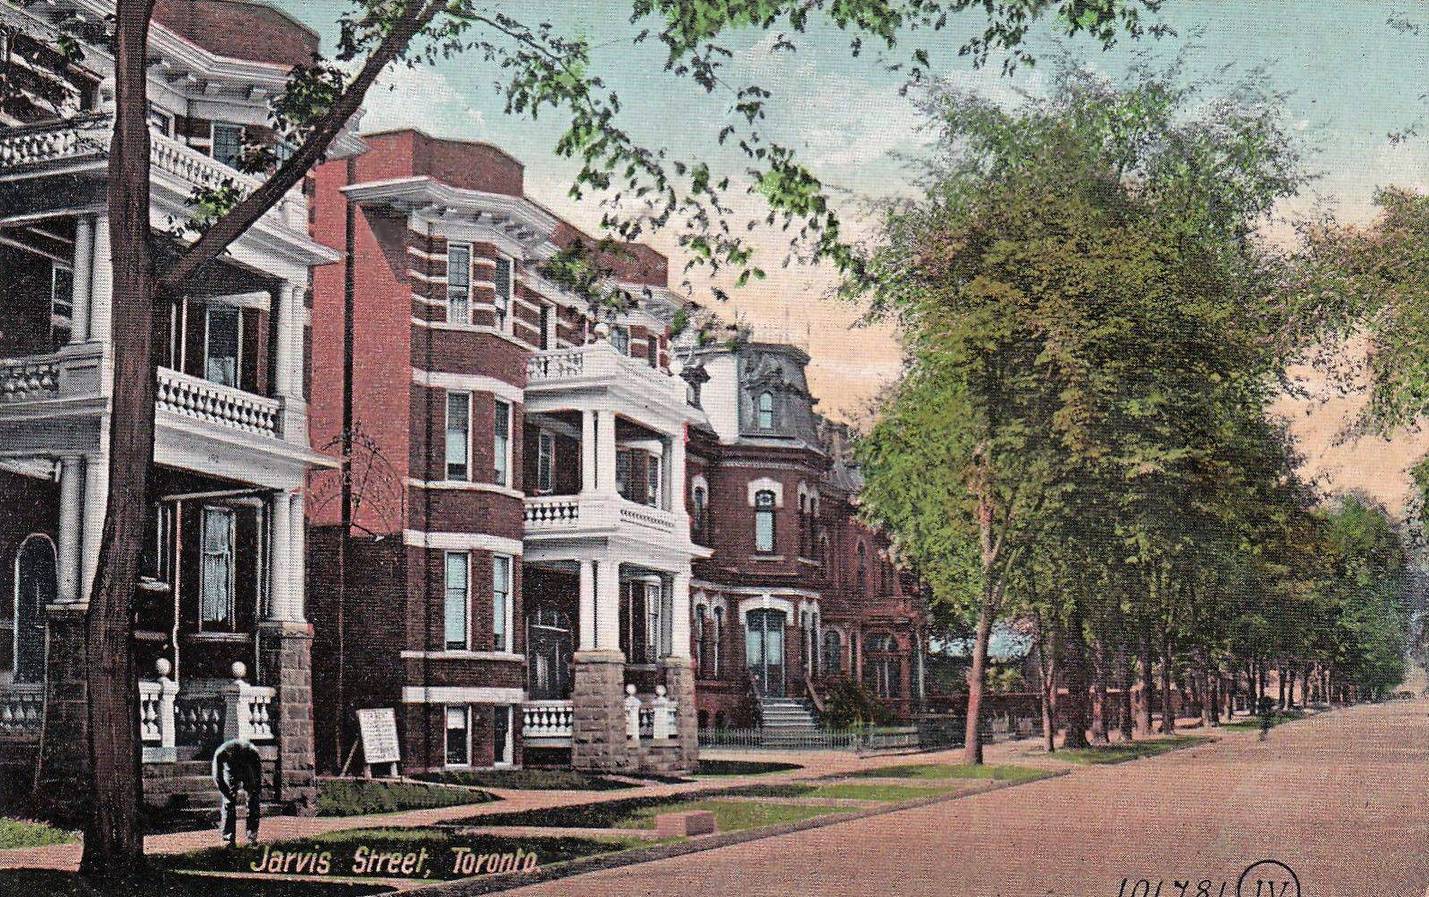 AA POSTCARD - TORONTO - JARVIS STREET - TREE-LINED - A COUPLE OF RARE APARTMENT BUILDINGS - MAN BENT OVER GRASS MAYBE CARETAKER - TINTED - 1910s